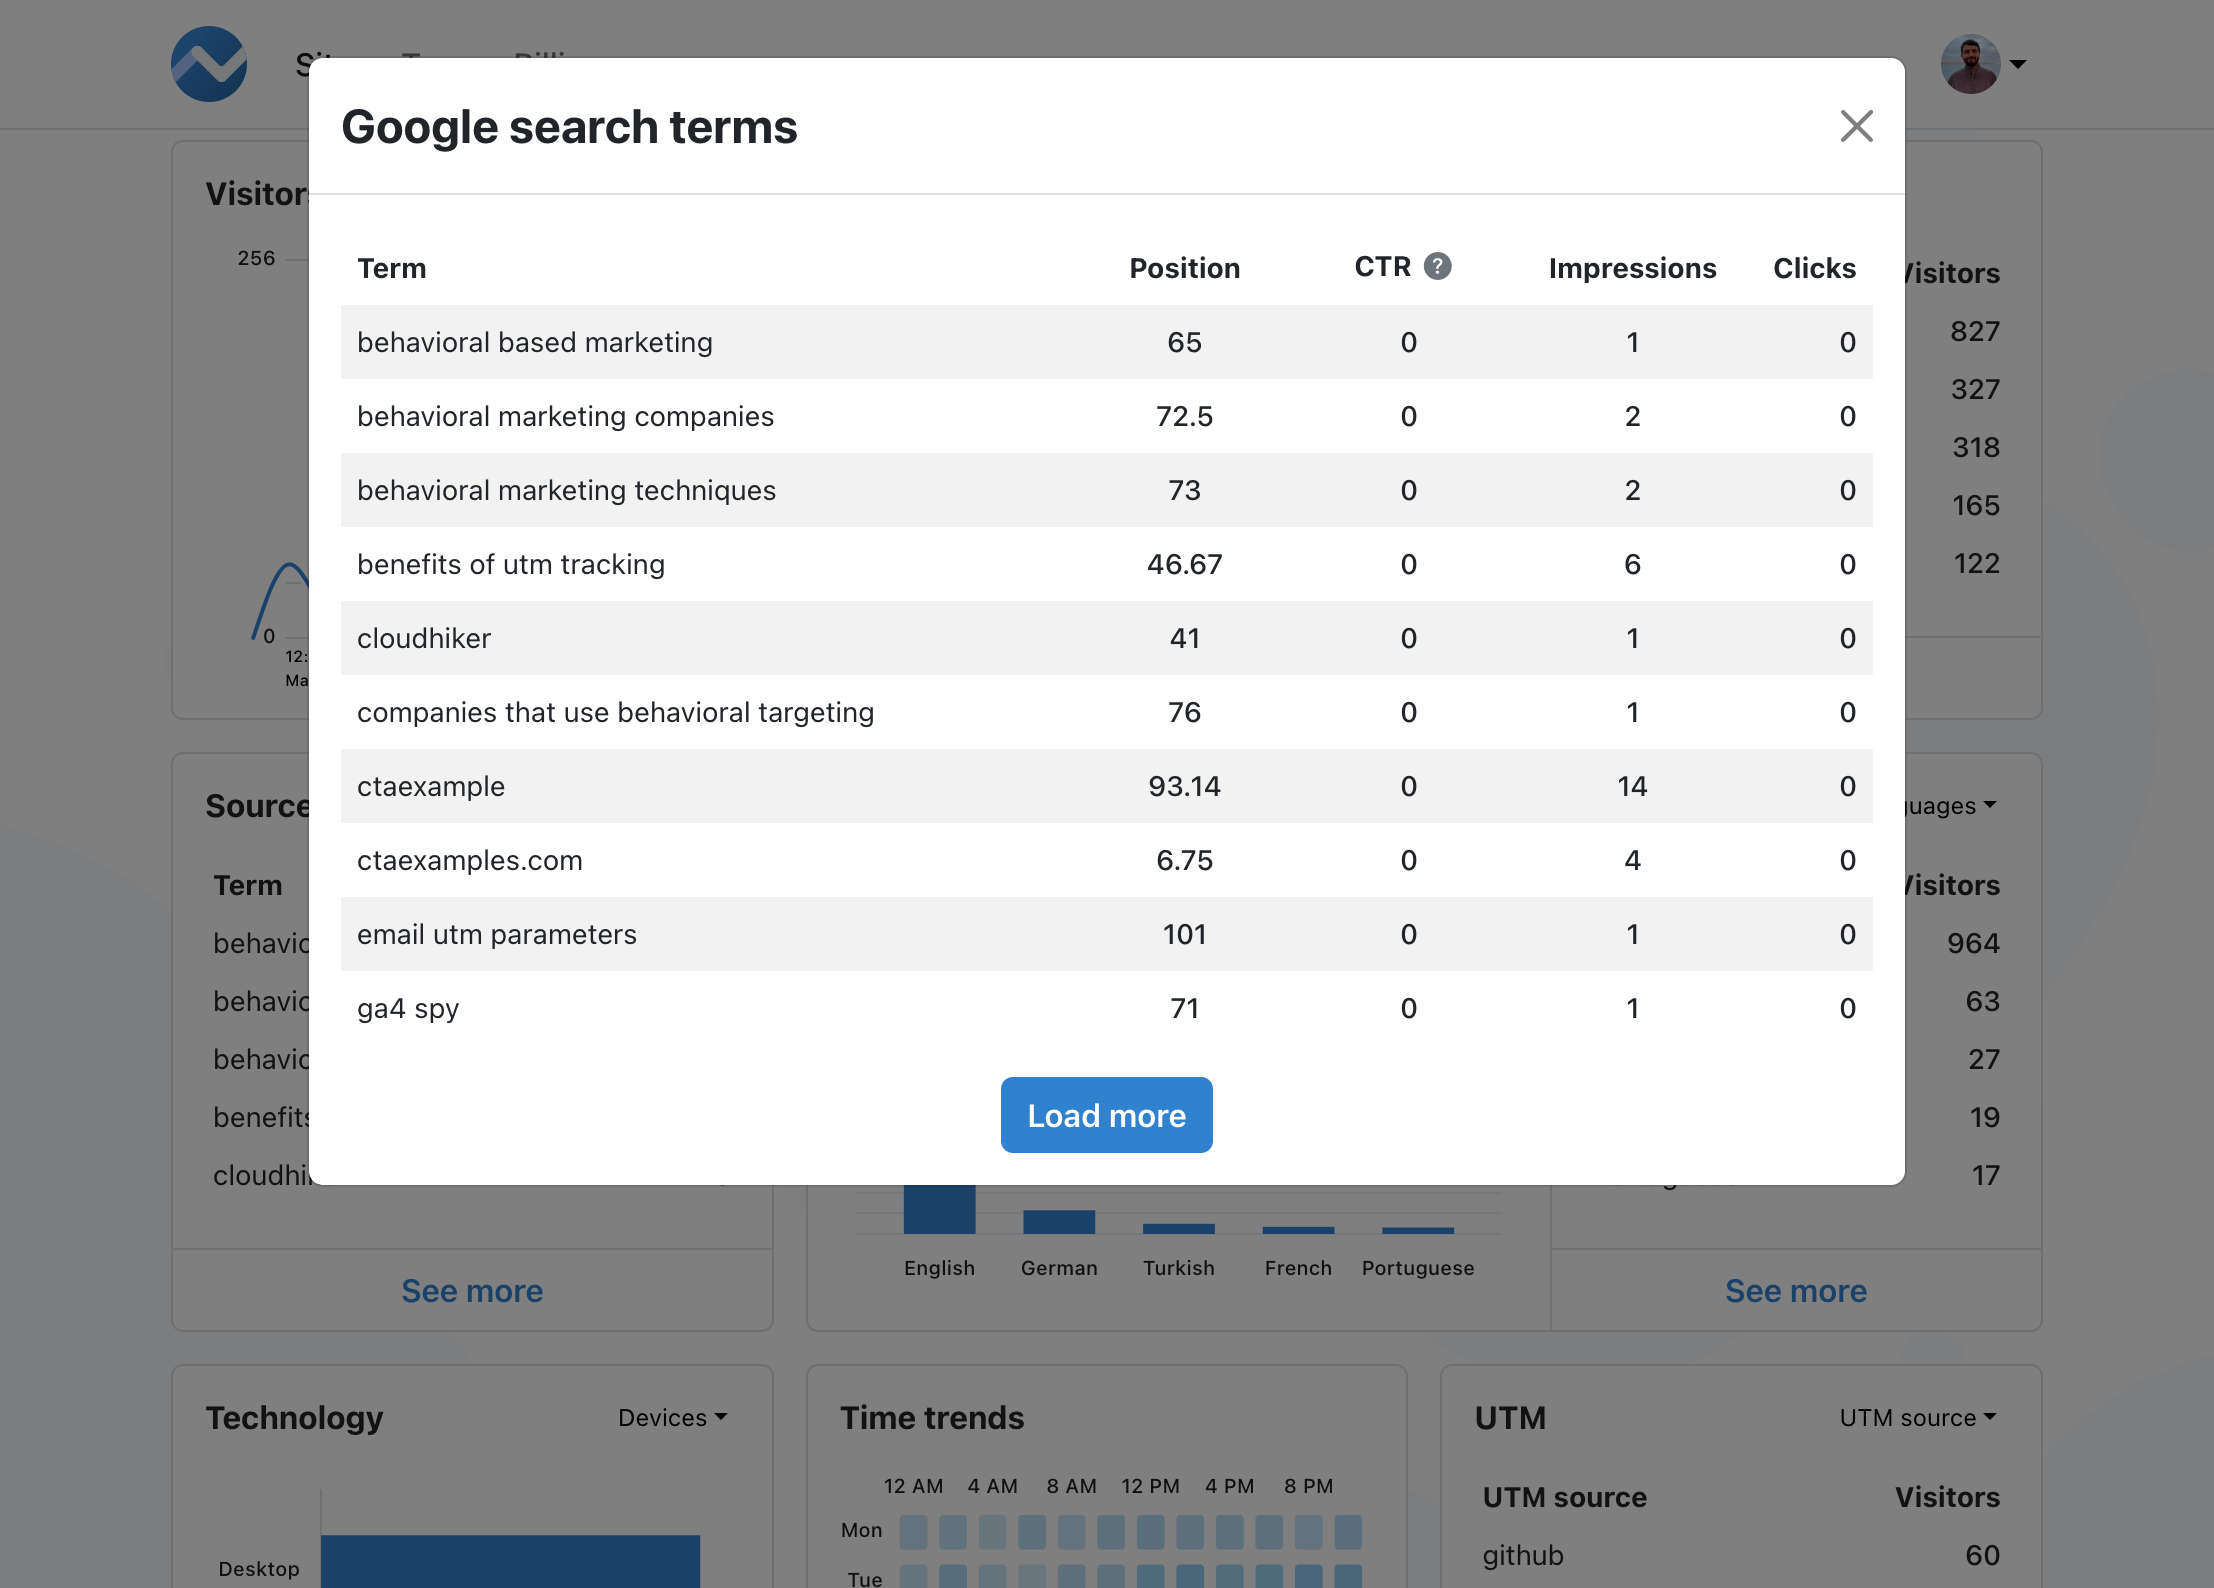 google search terms report details